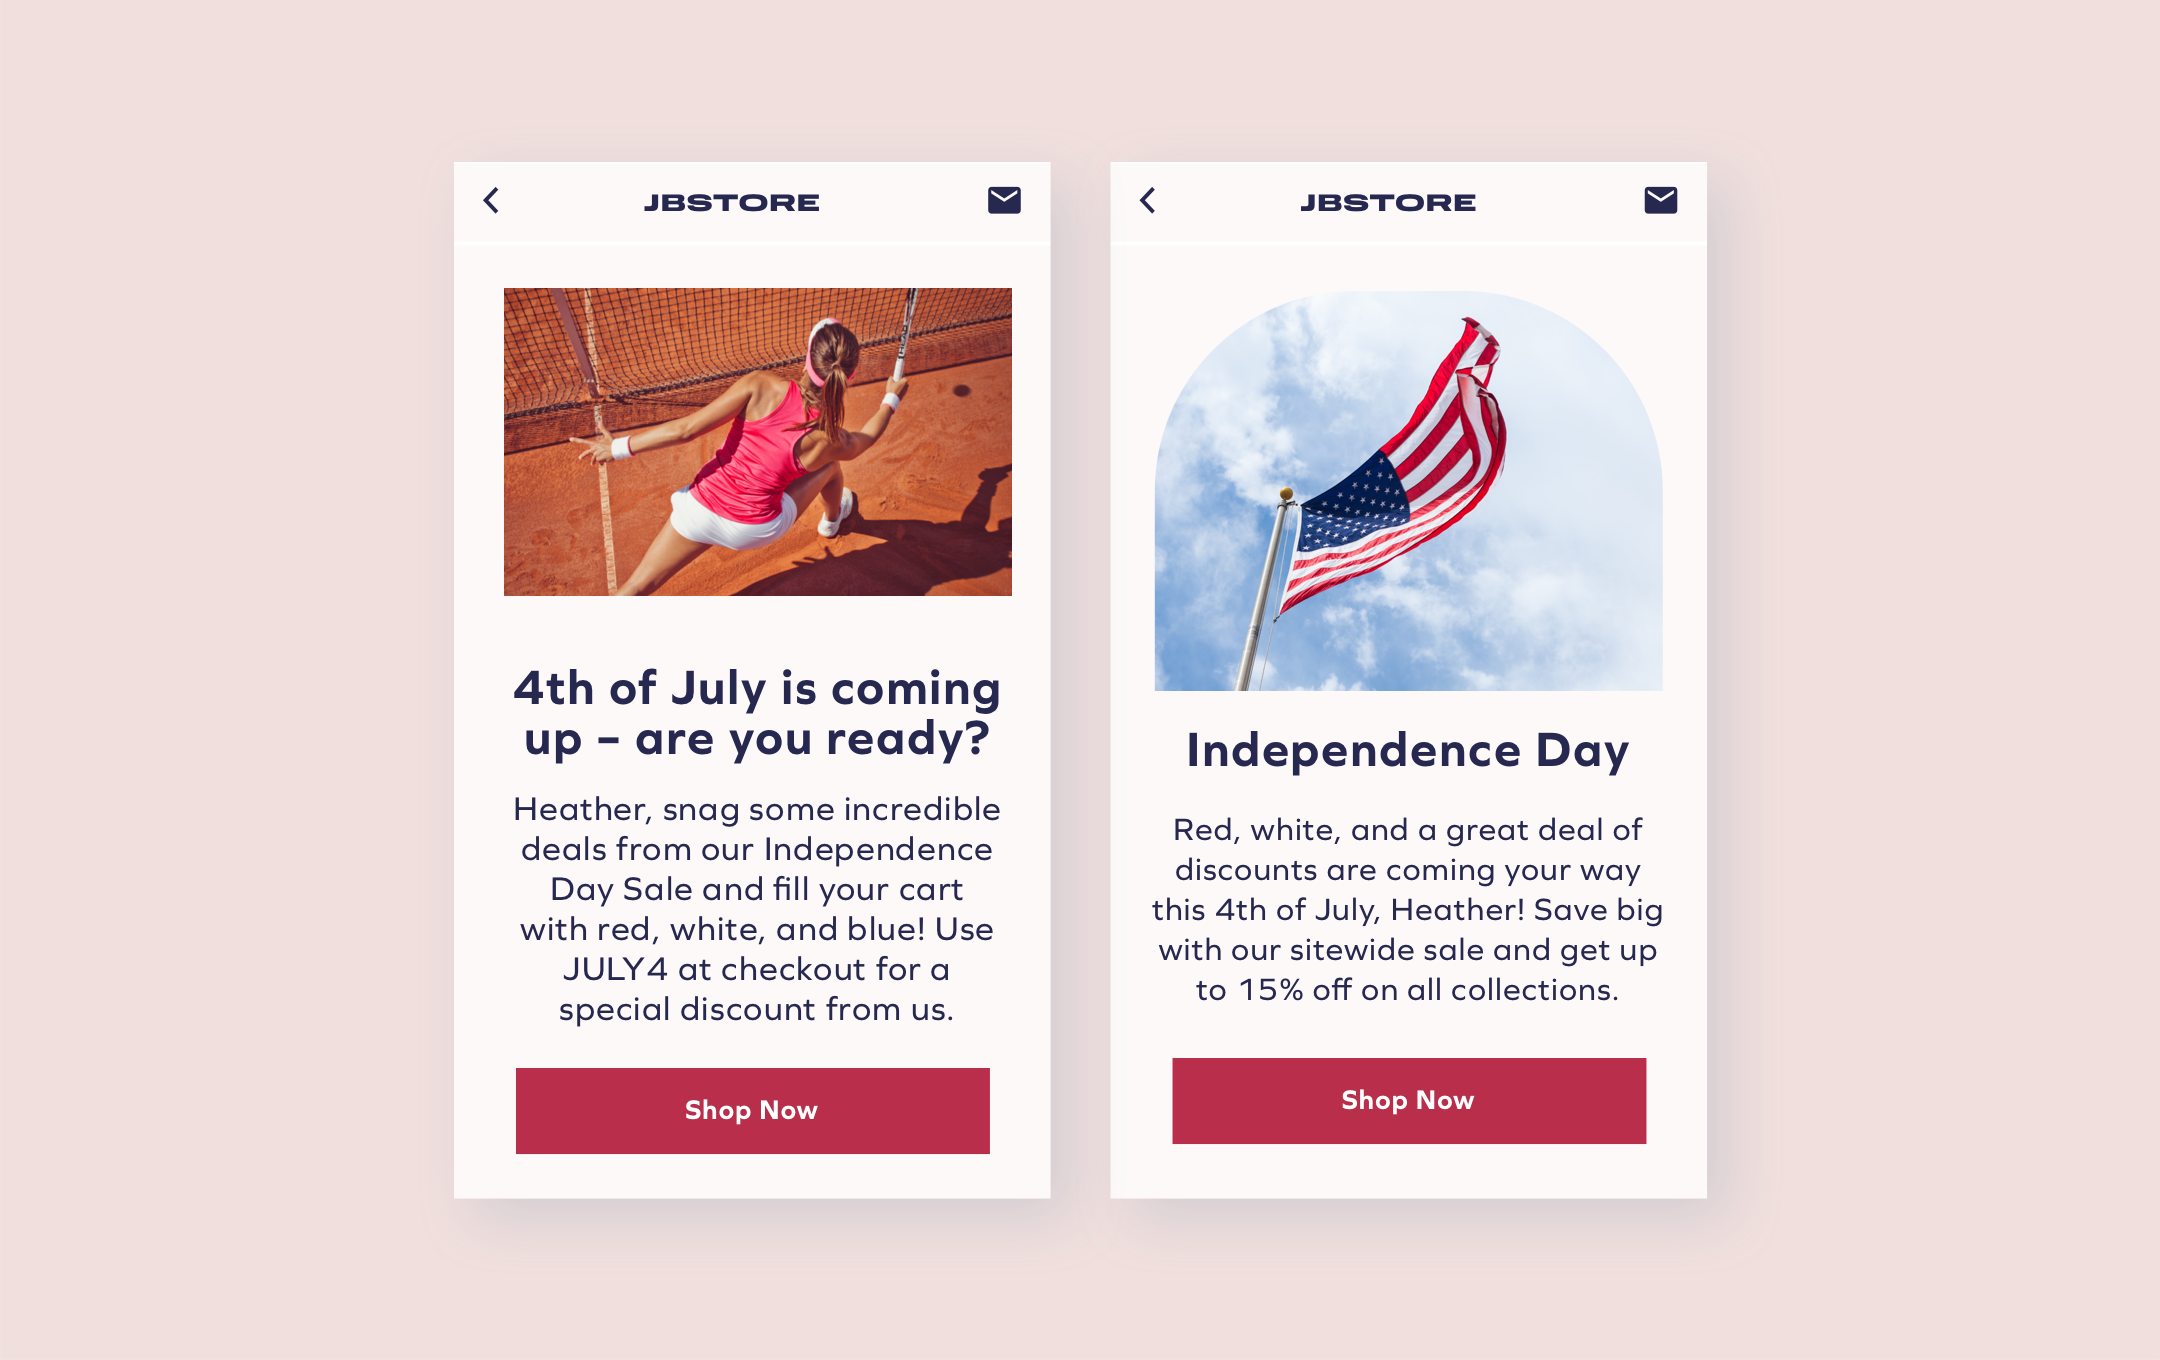 4th of July SMS & Email marketing